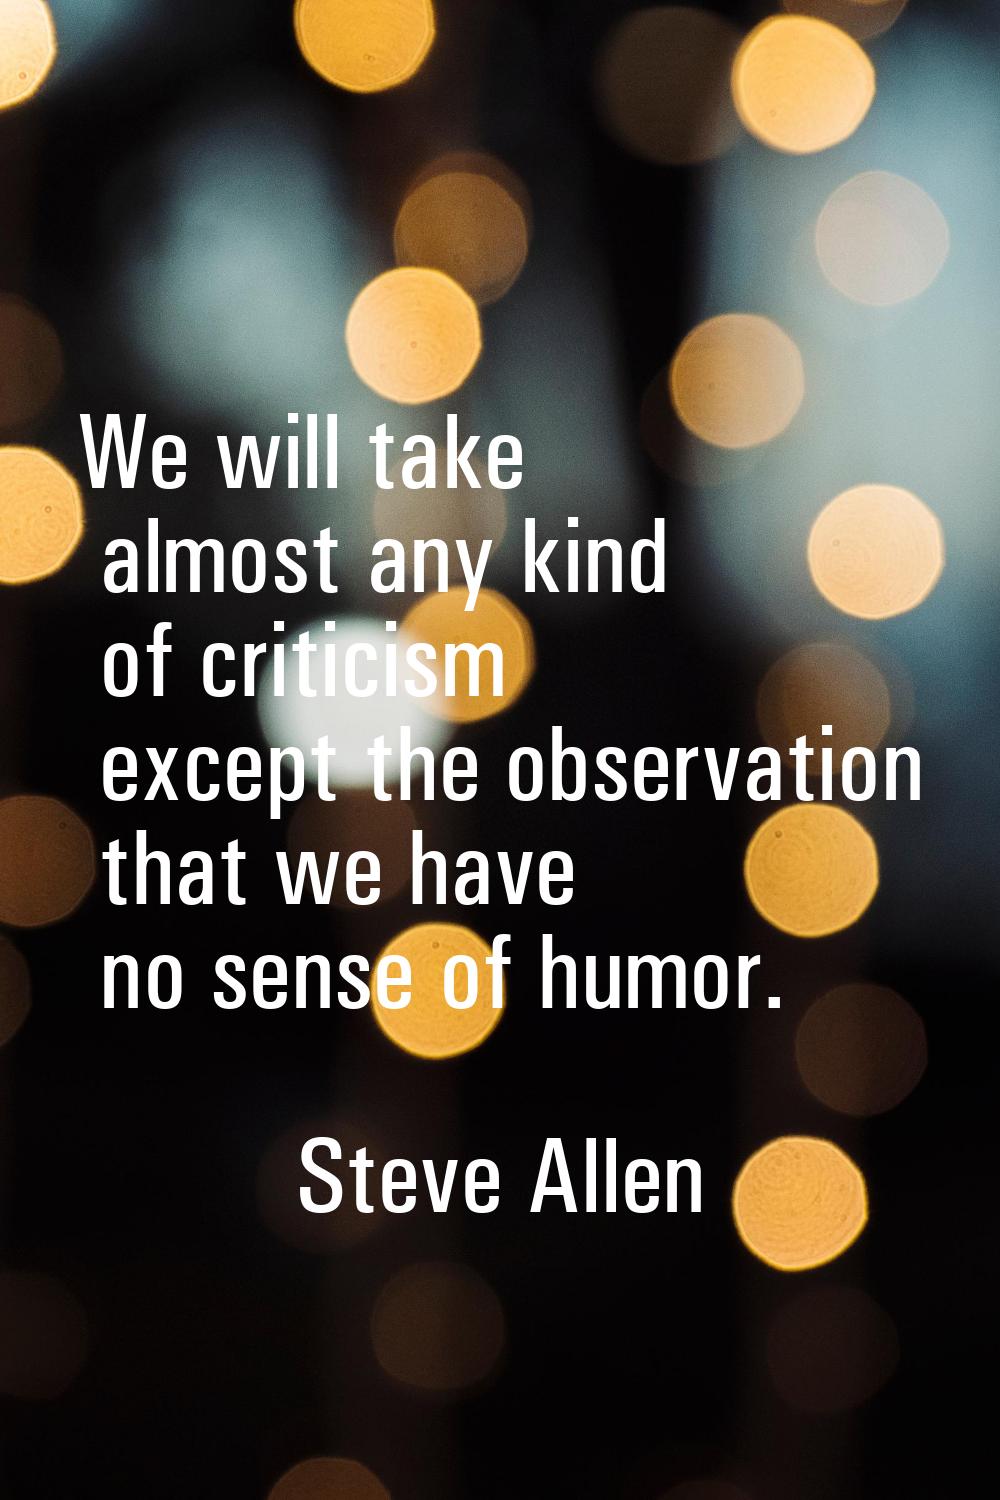 We will take almost any kind of criticism except the observation that we have no sense of humor.